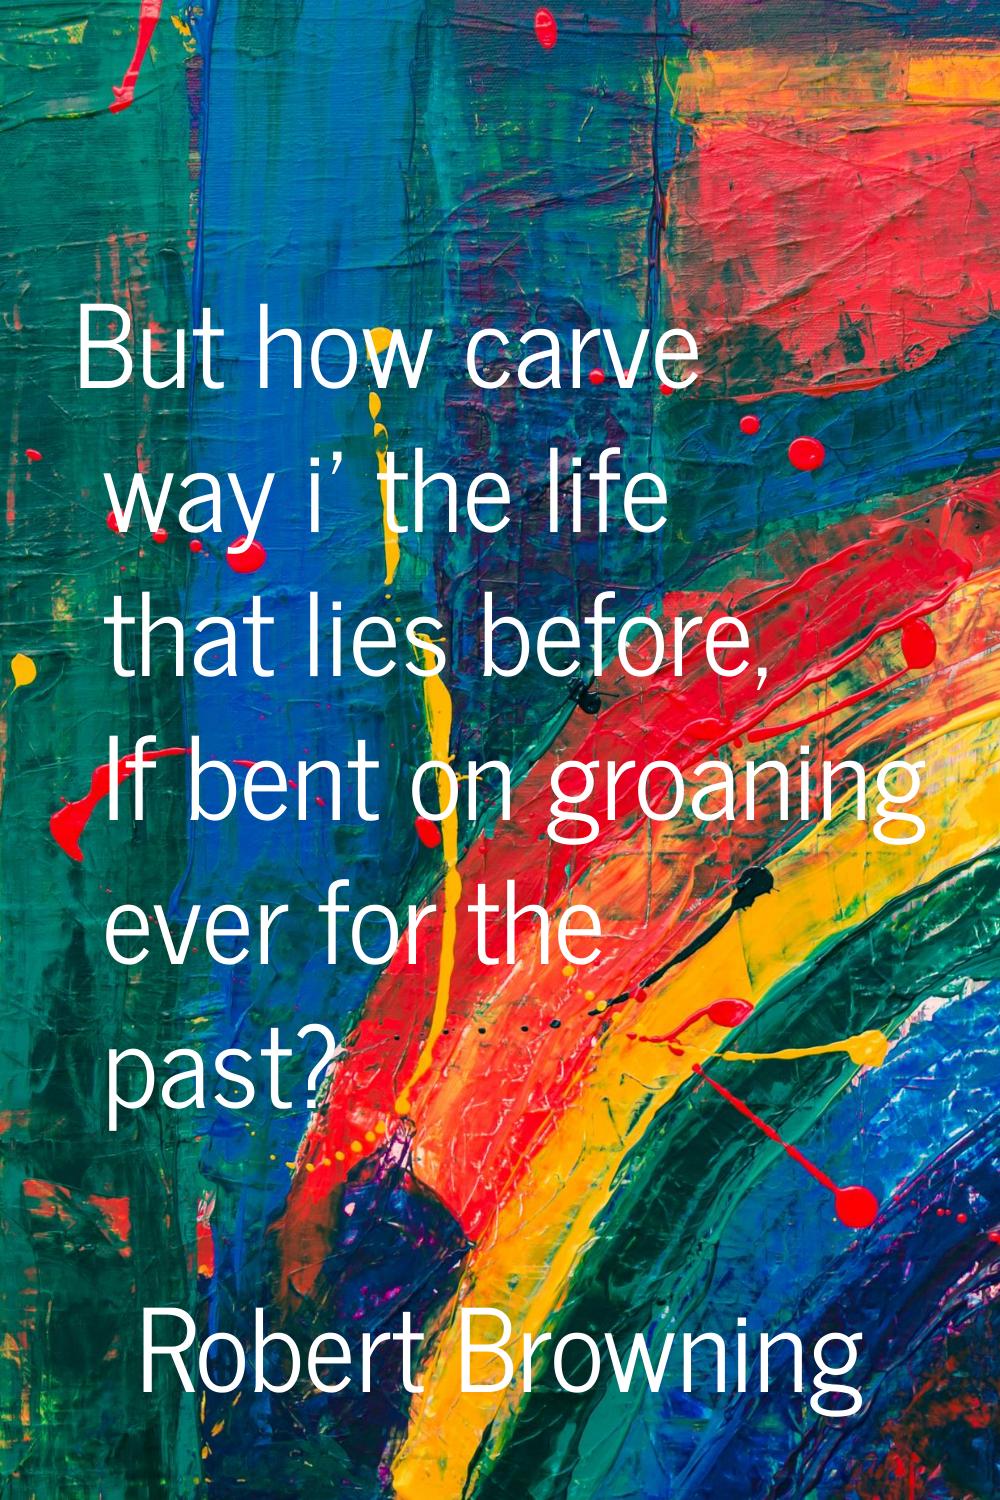 But how carve way i' the life that lies before, If bent on groaning ever for the past?